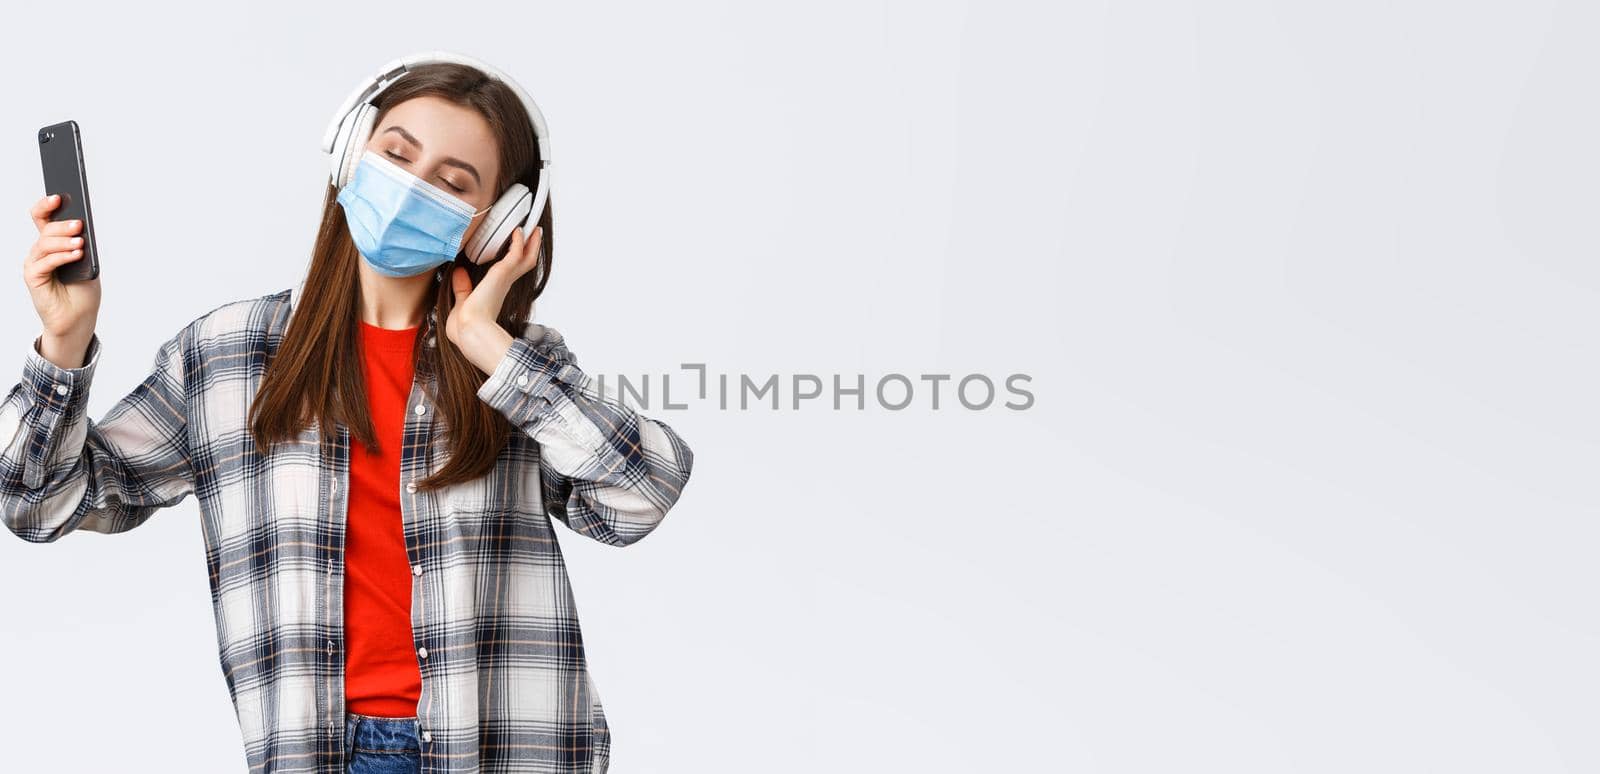 Social distancing, leisure and lifestyle on covid-19 outbreak, coronavirus concept. Carefree young girl in medical mask and headphones, close eyes dancing to music, perfect sound, hold mobile phone.